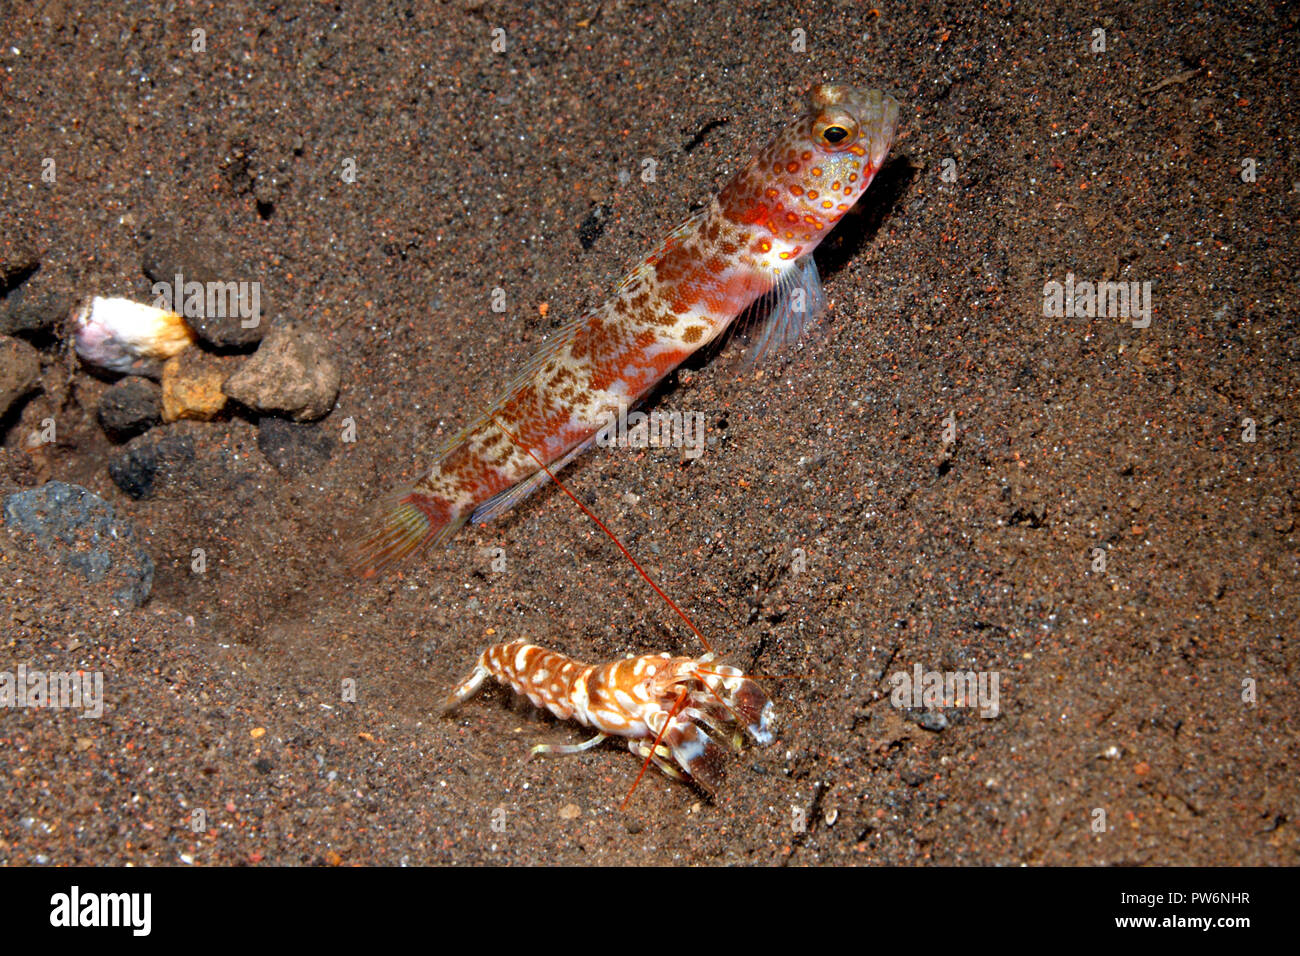 Broad-Banded Shrimpgoby, Amblyeleotris periophthalma with Alpheid Shrimp, Alpheus bellulus. See below for further information. Stock Photo